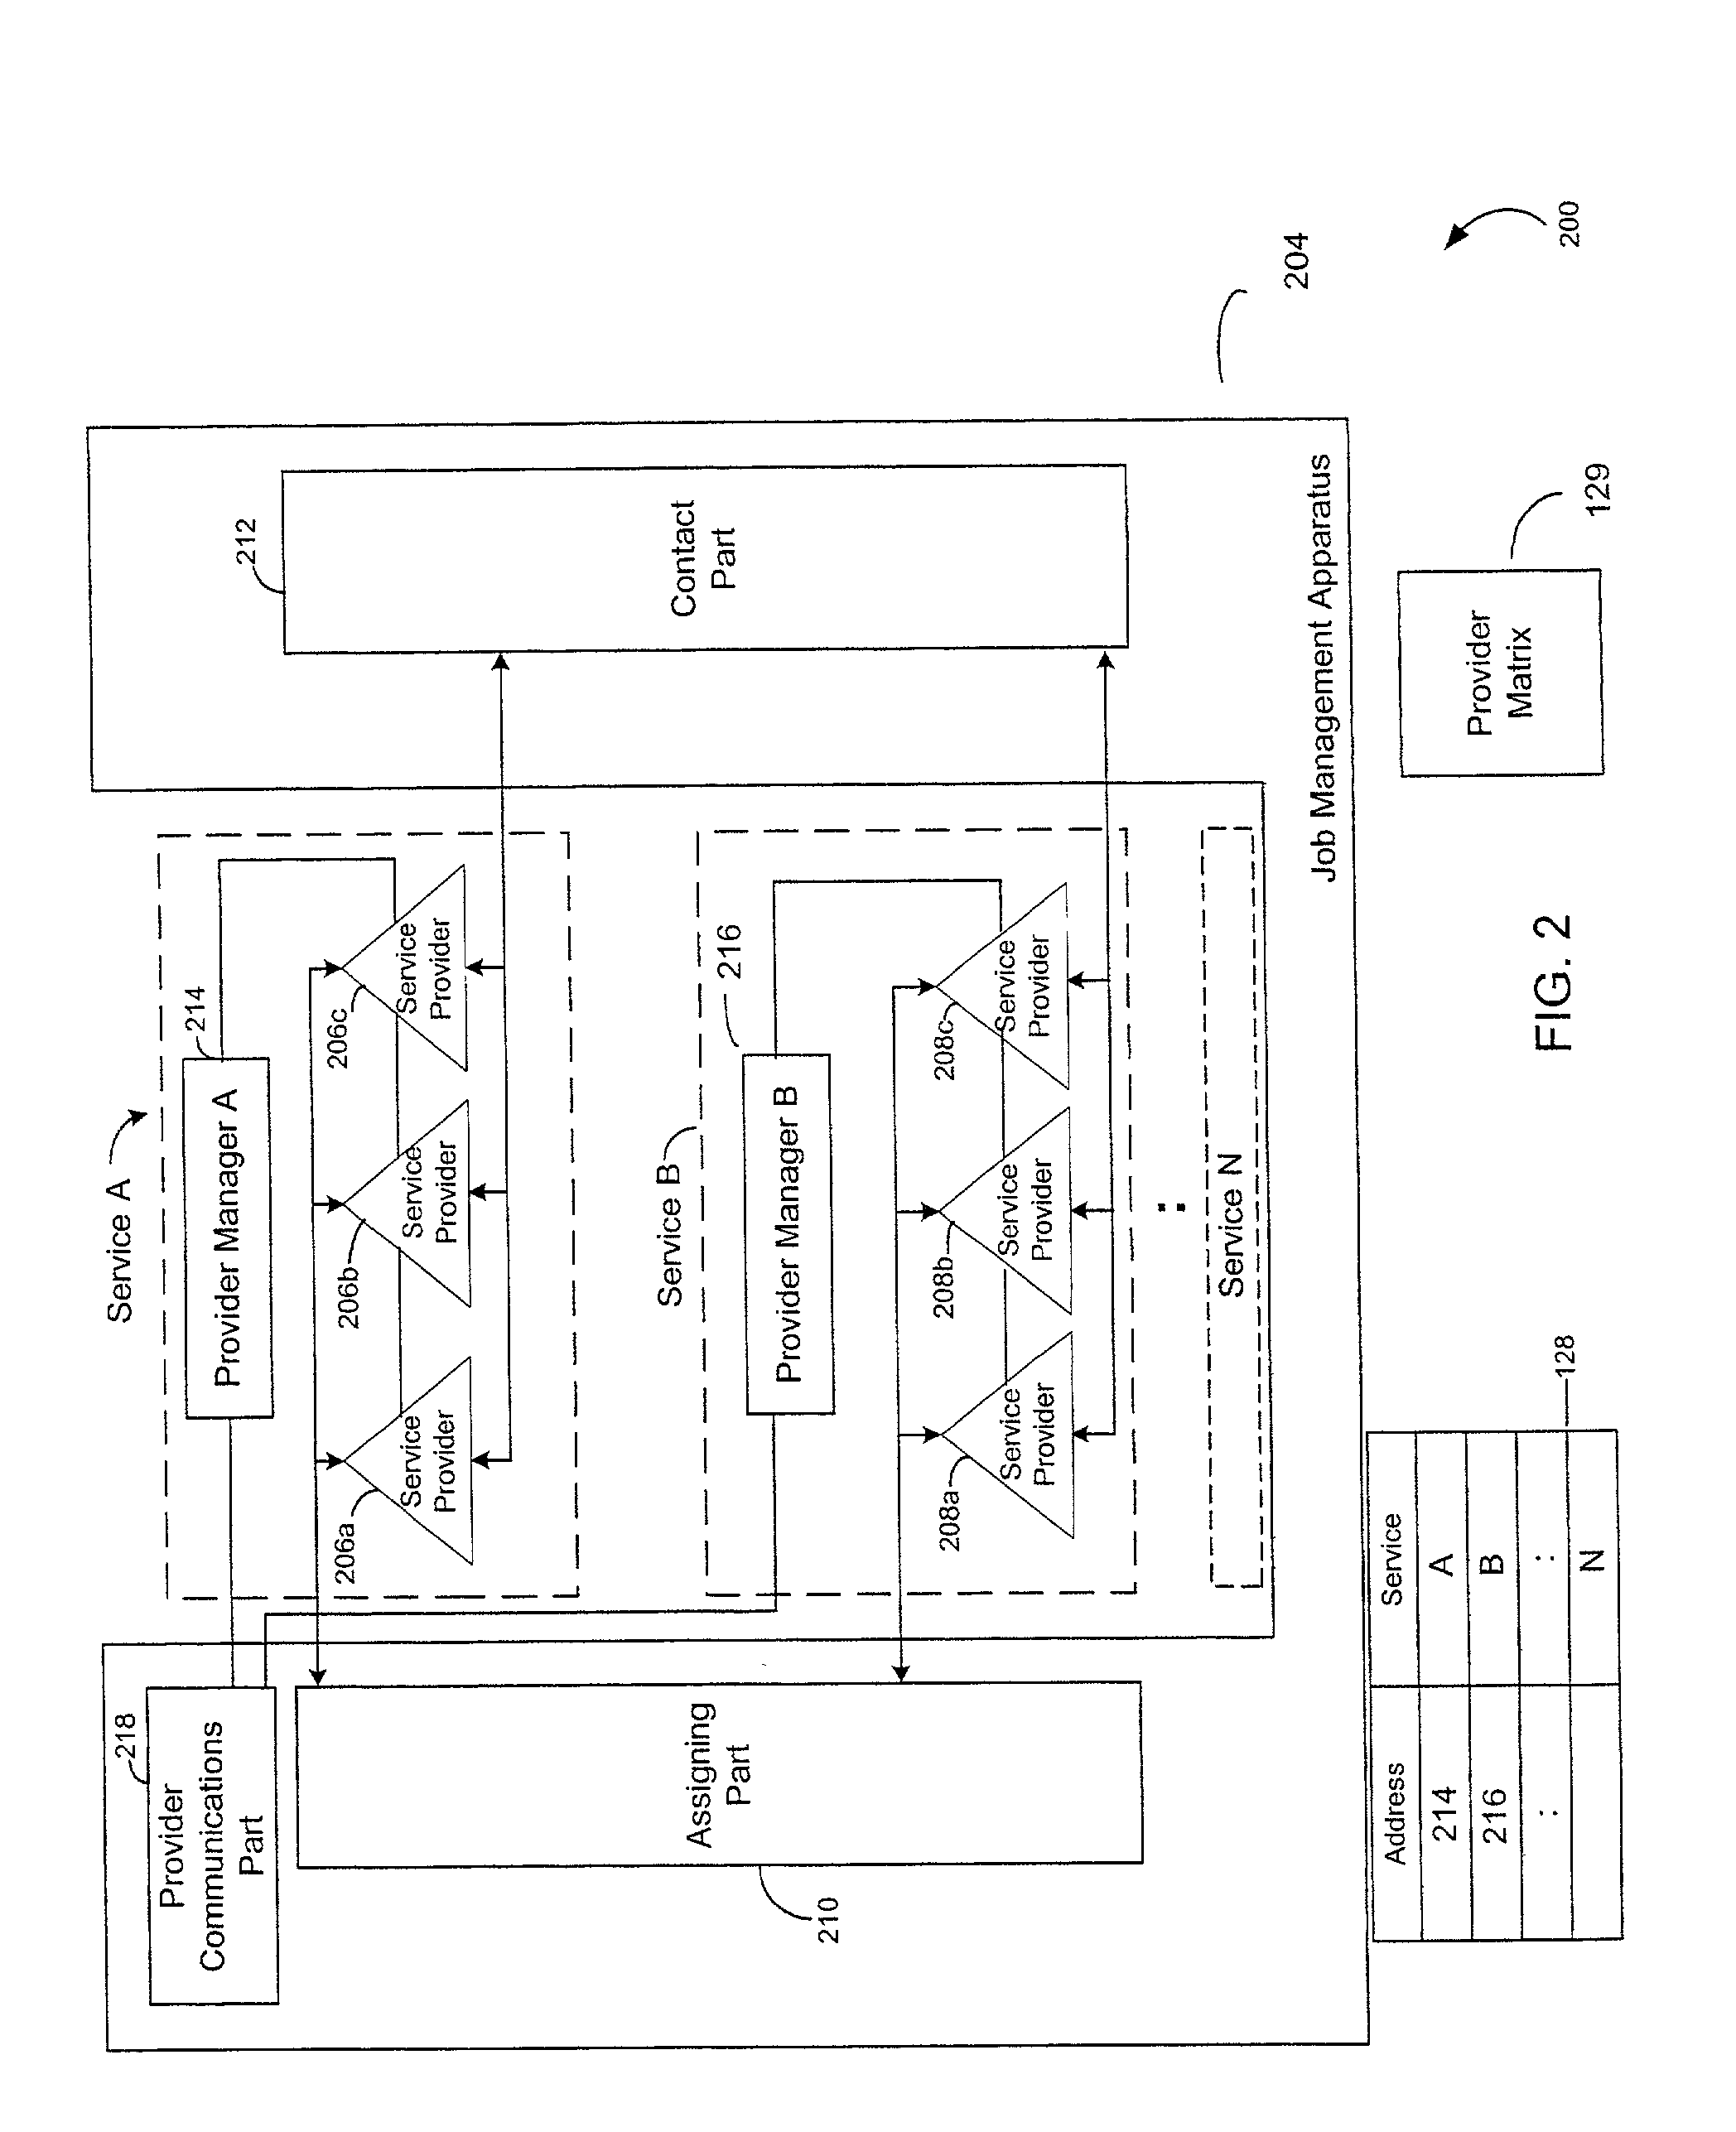 System for creating efficient multi-step document conversion services